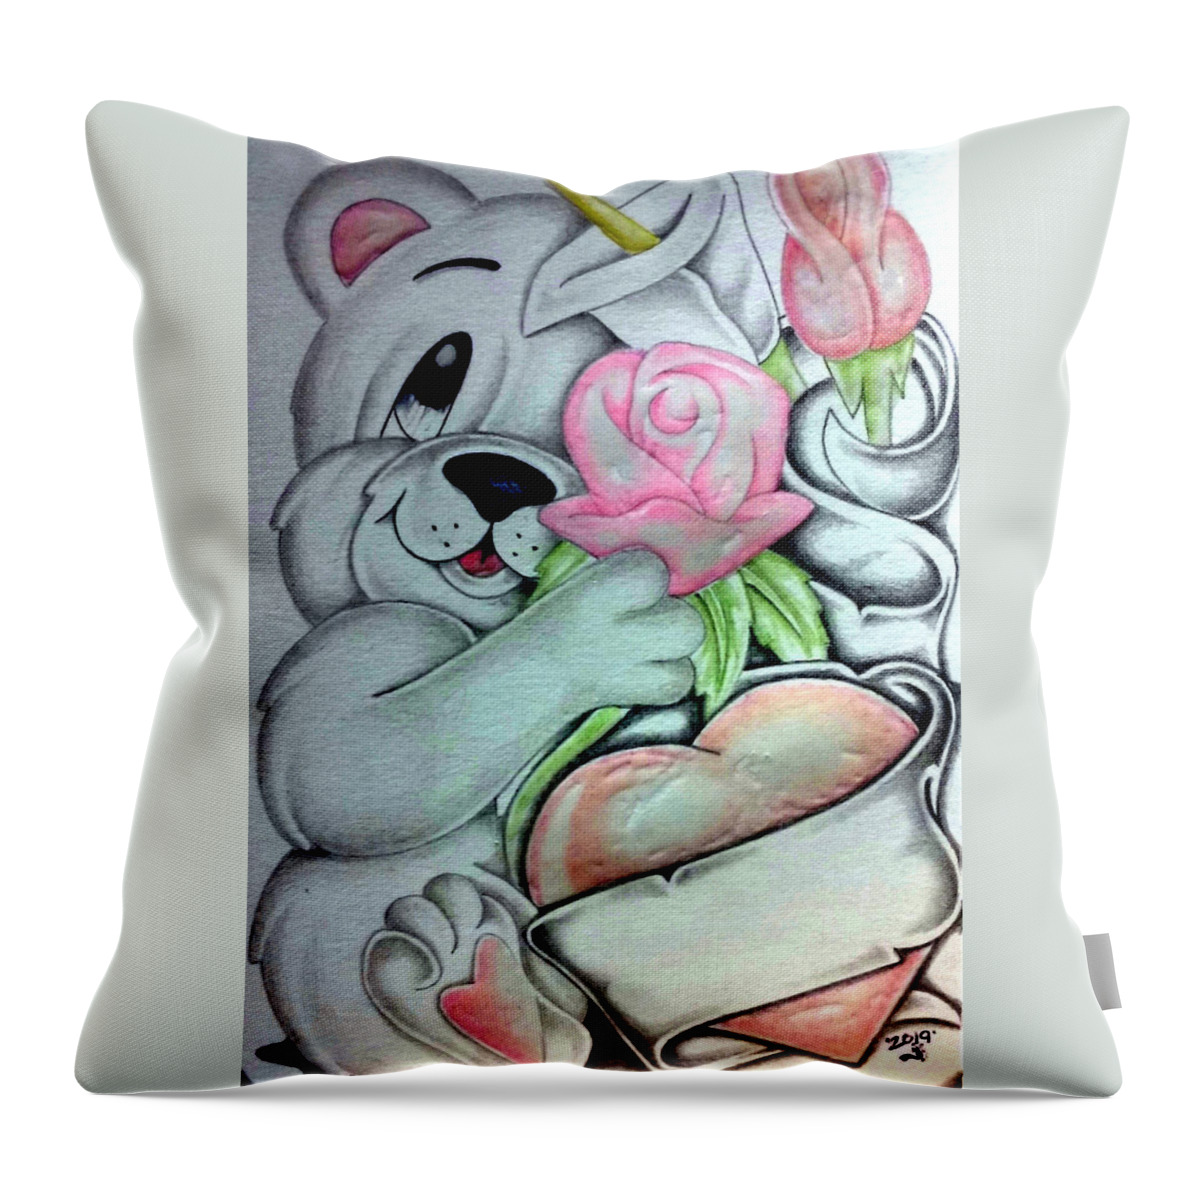 Mexican American Art Throw Pillow featuring the drawing Untitled 5 by Abraham Reasons Ledesma